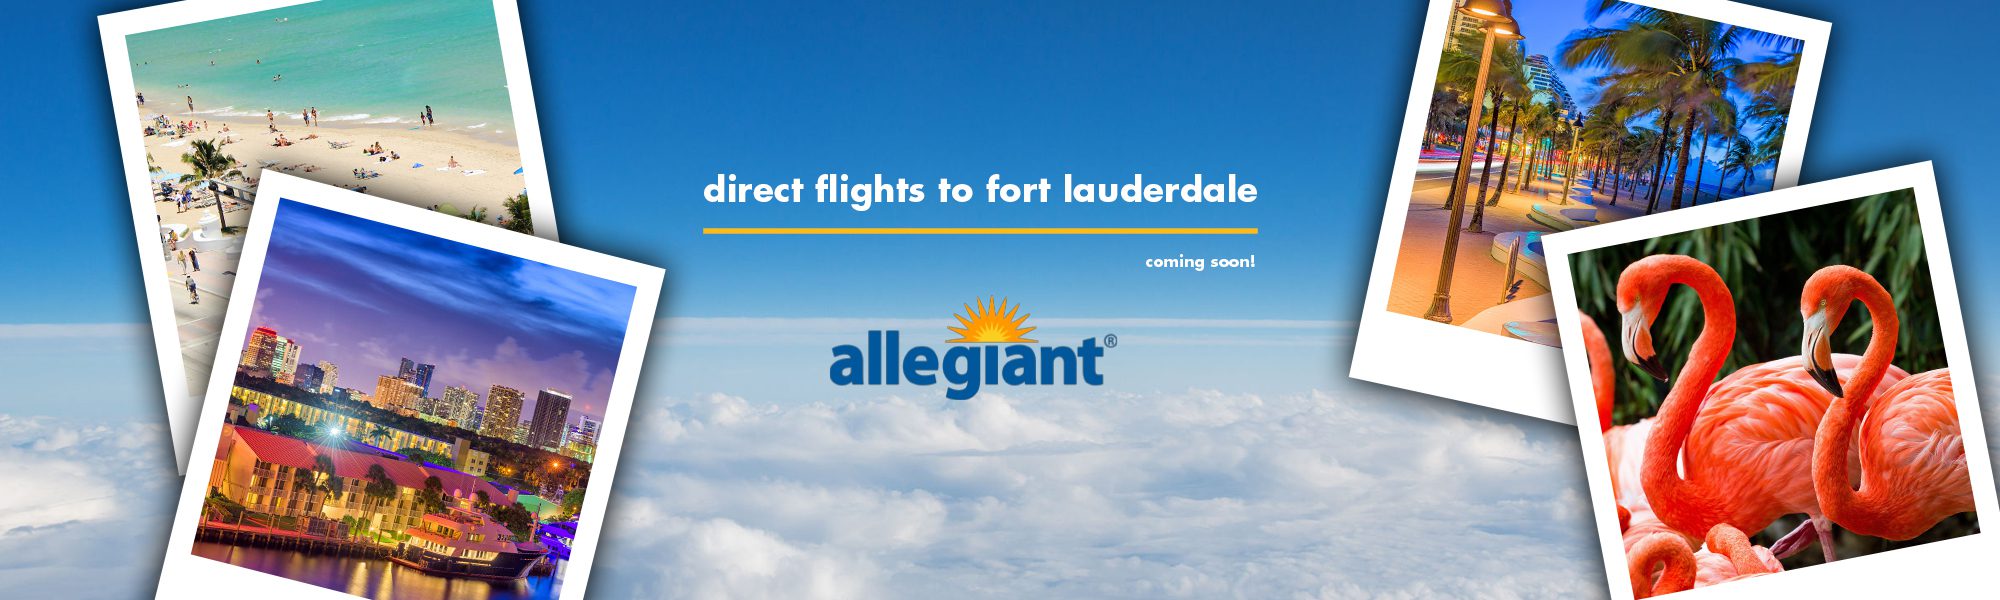 New Direct Flights to Fort Lauderdale coming soon!